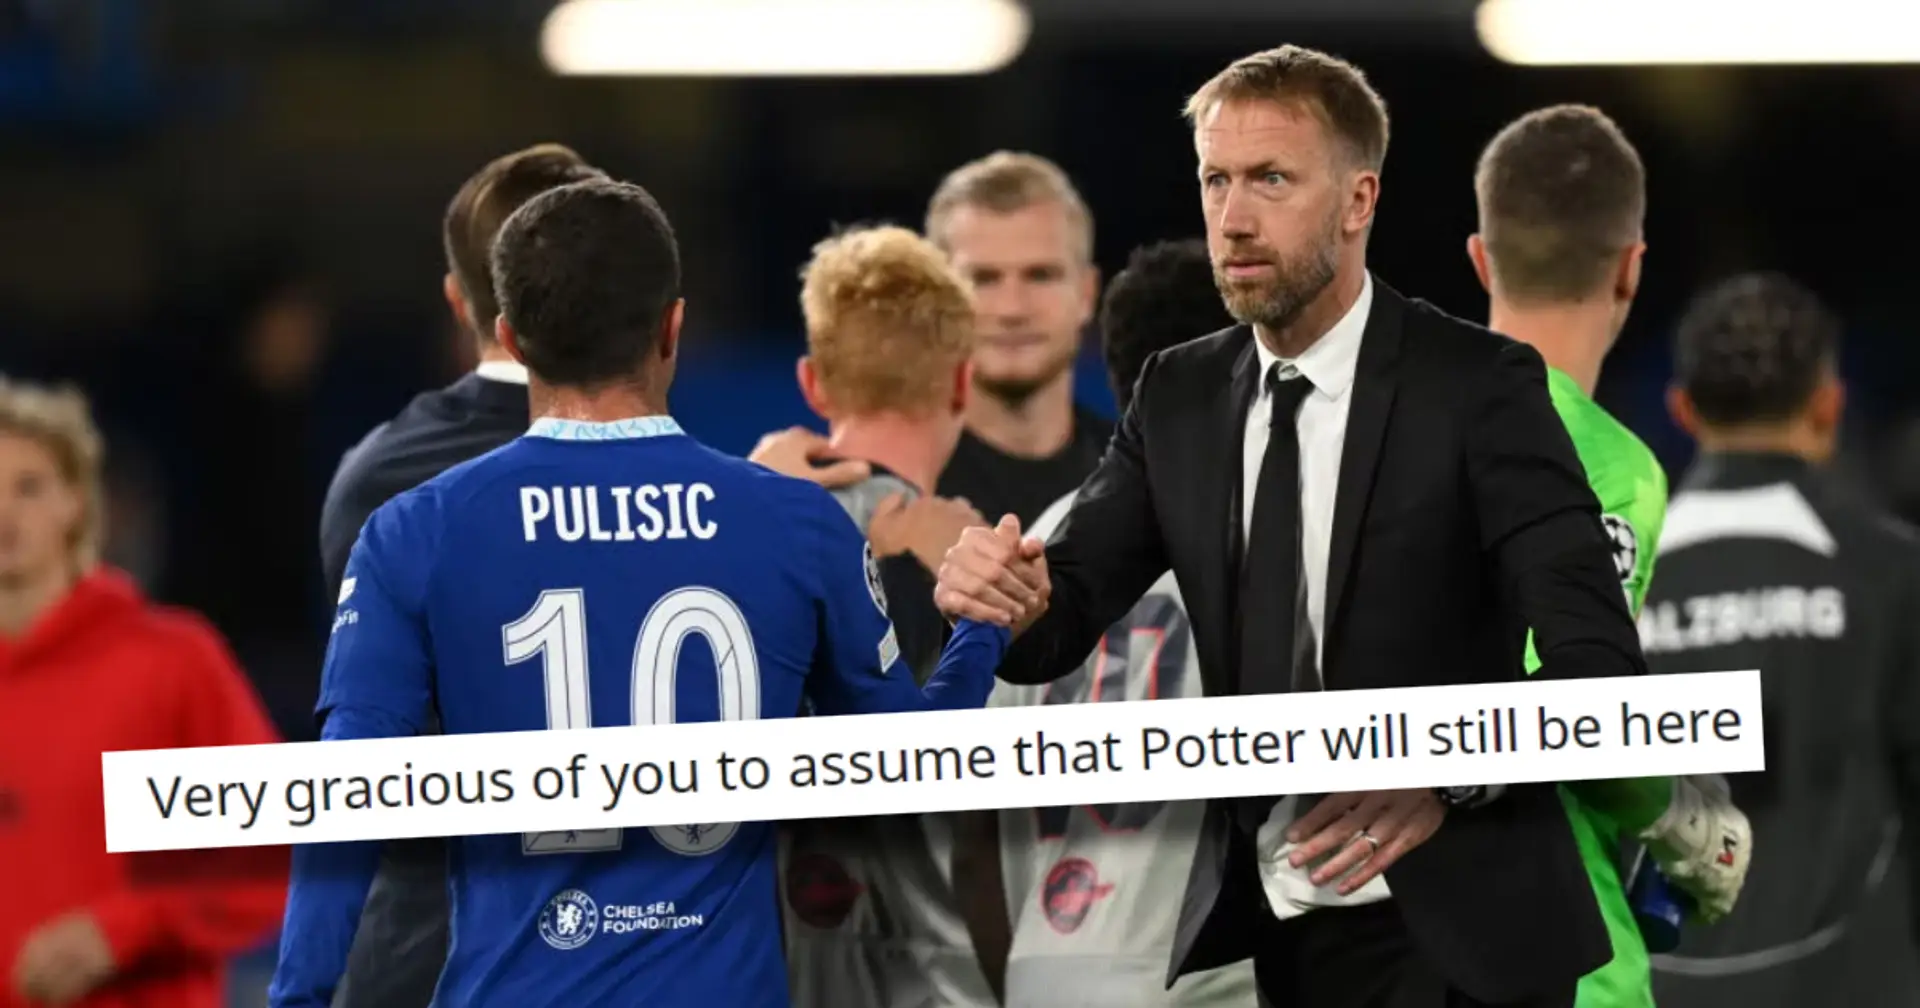 'Realistically? Nothing this season': fans debate what we should expect of Potter's Chelsea in next 2 seasons